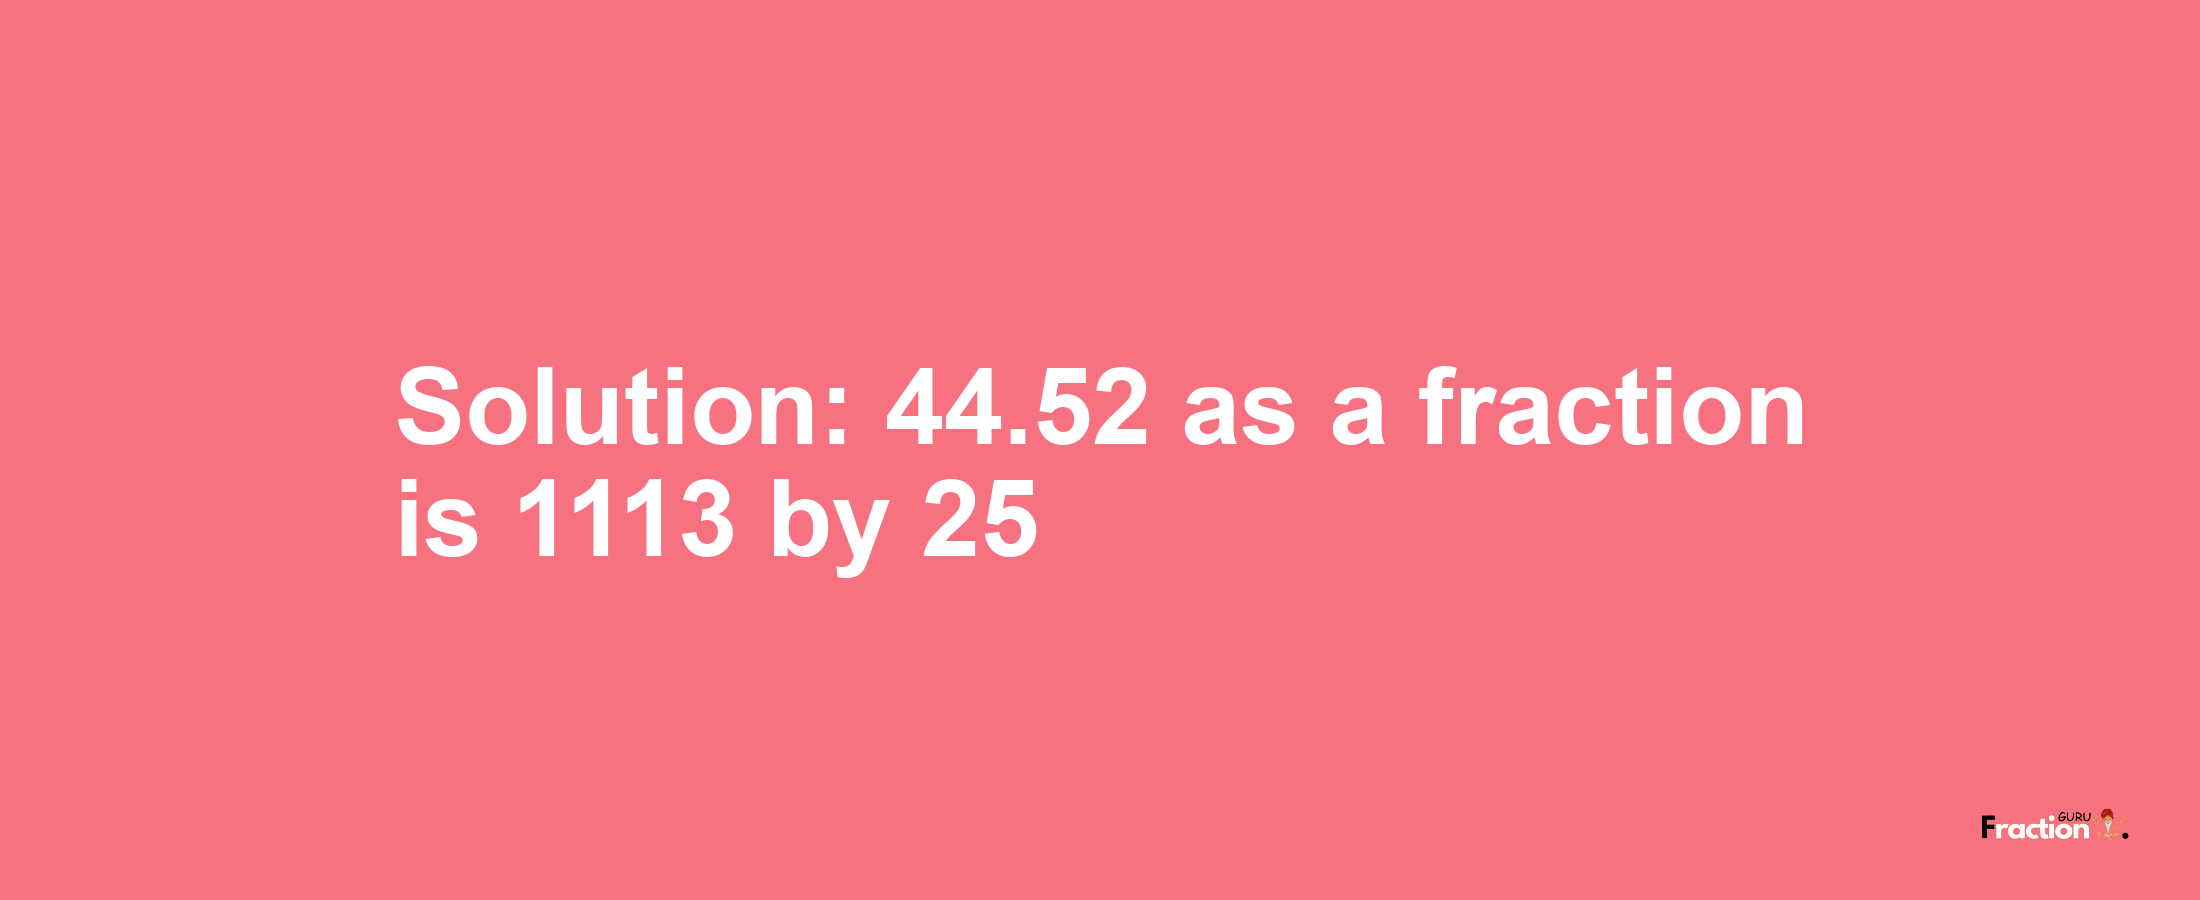 Solution:44.52 as a fraction is 1113/25